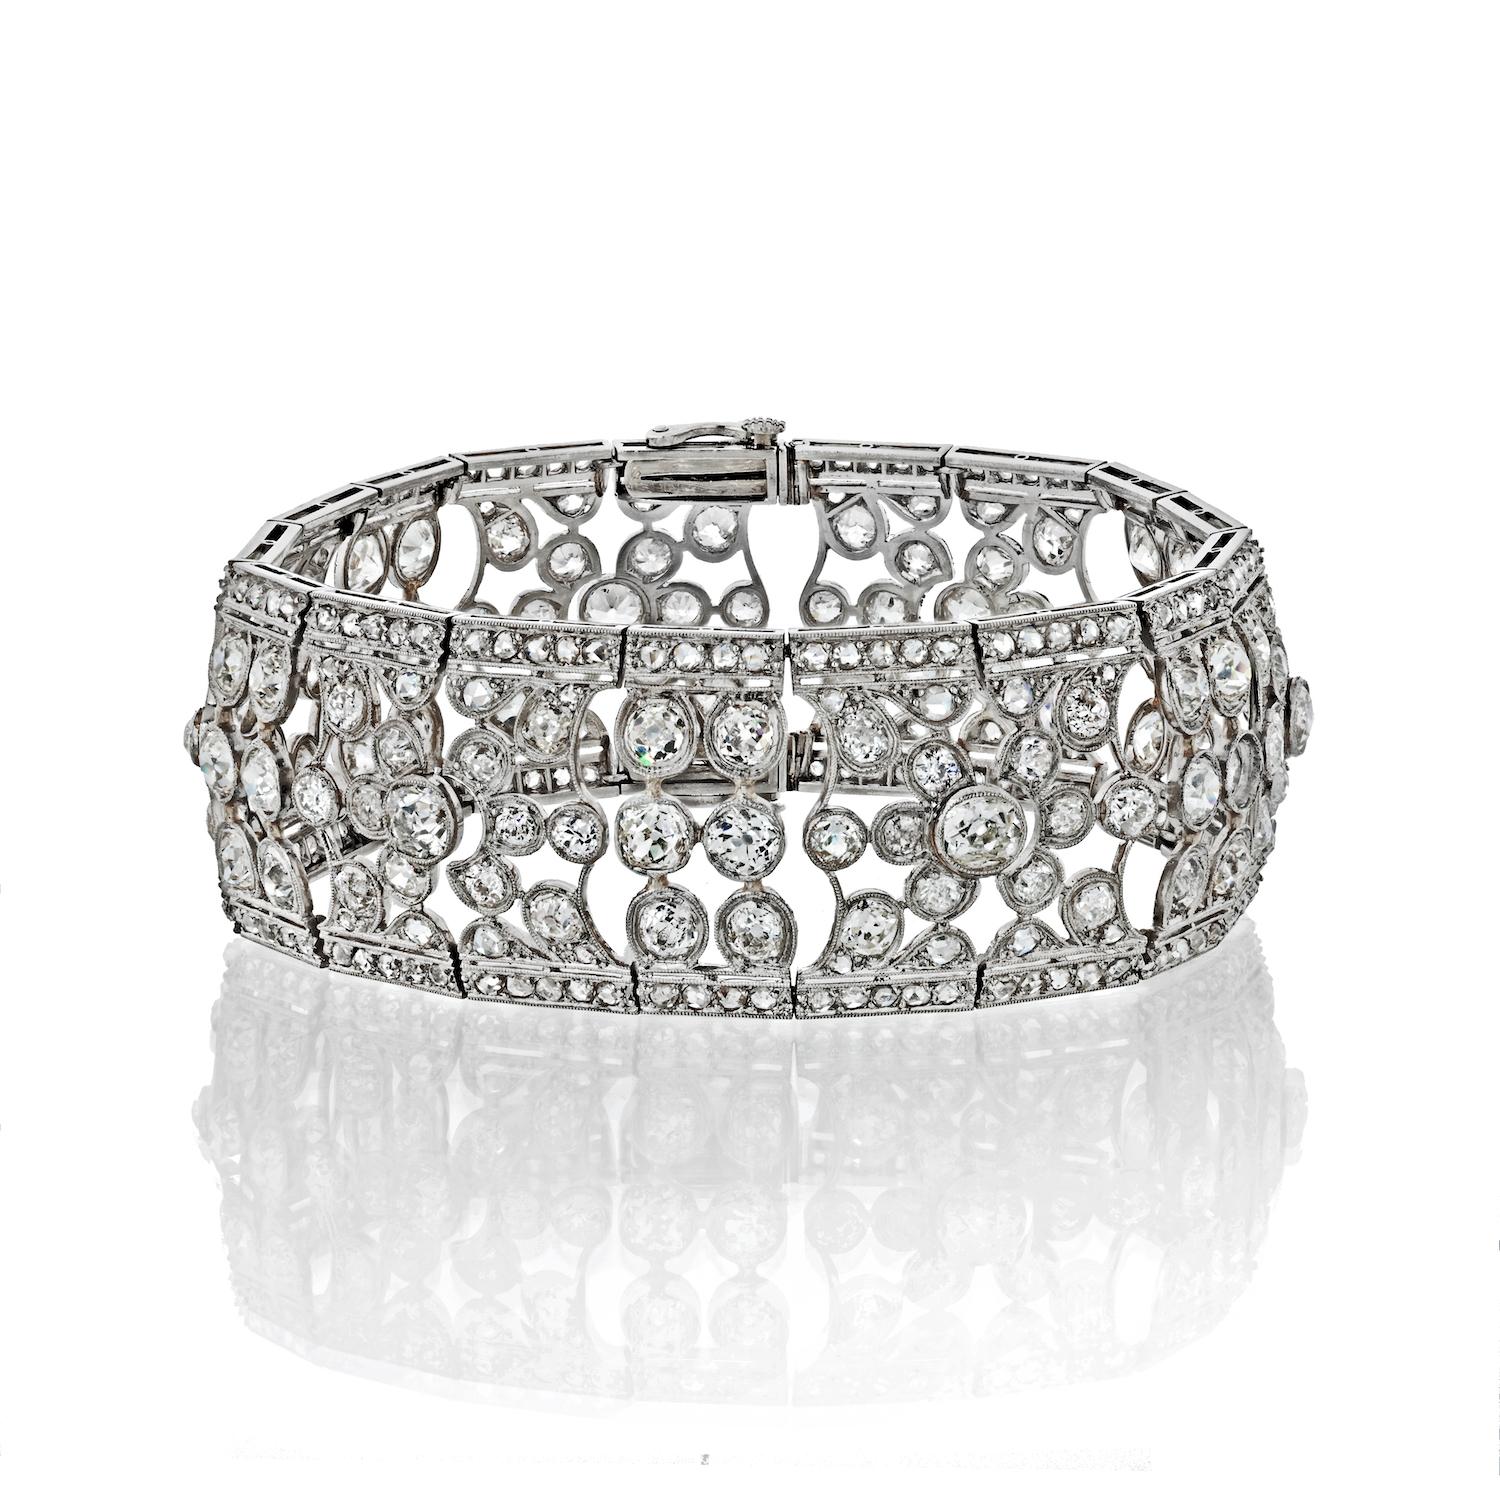 Crafted in 1940's this is a platinum openwork bracelet set with 316 old-cut diamonds. 
This bracelet is 7.5 inches long and 1 inch wide. 
